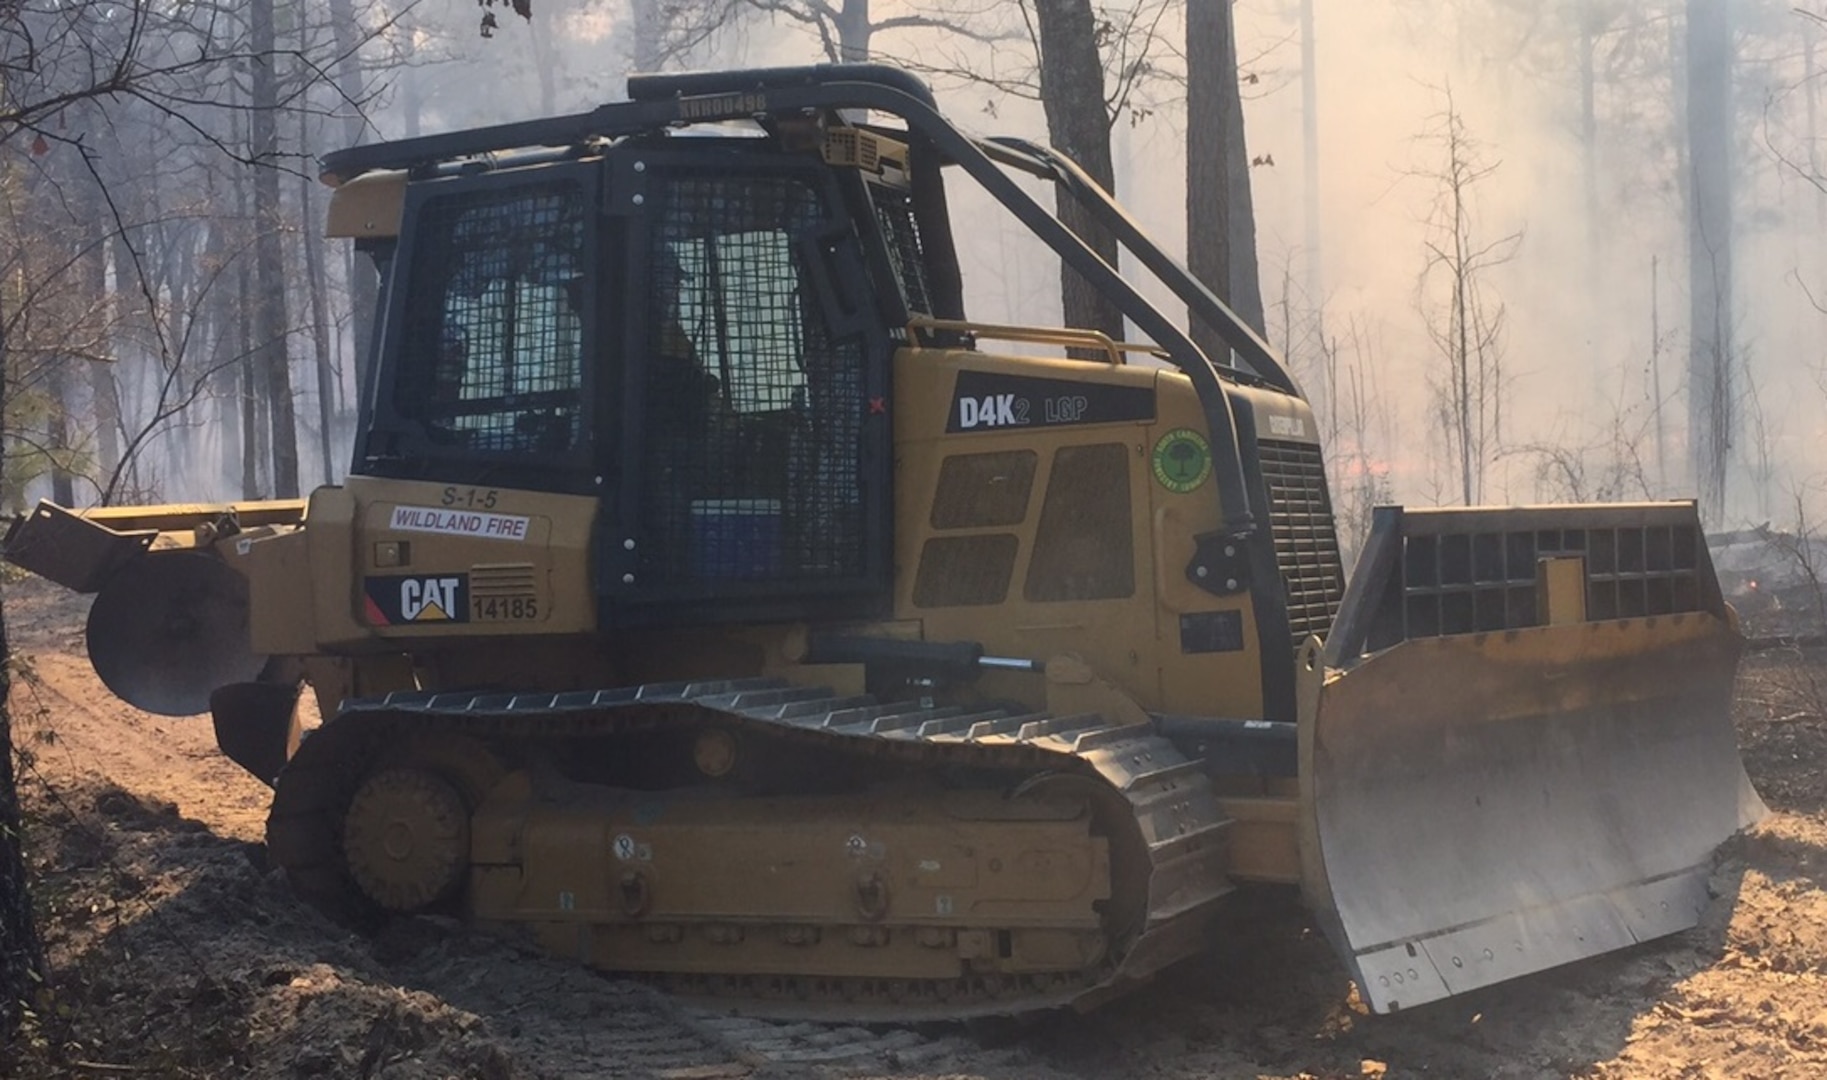 Excess hydraulic oil from Marine Corps Base Camp Lejeune, North Carolina, will help Caterpillar D4K2 Firefighting Dozers used by the South Carolina Forestry Commission deal with the extreme conditions that occur during while putting out fires, which can damage to hydraulic hoses and fittings.